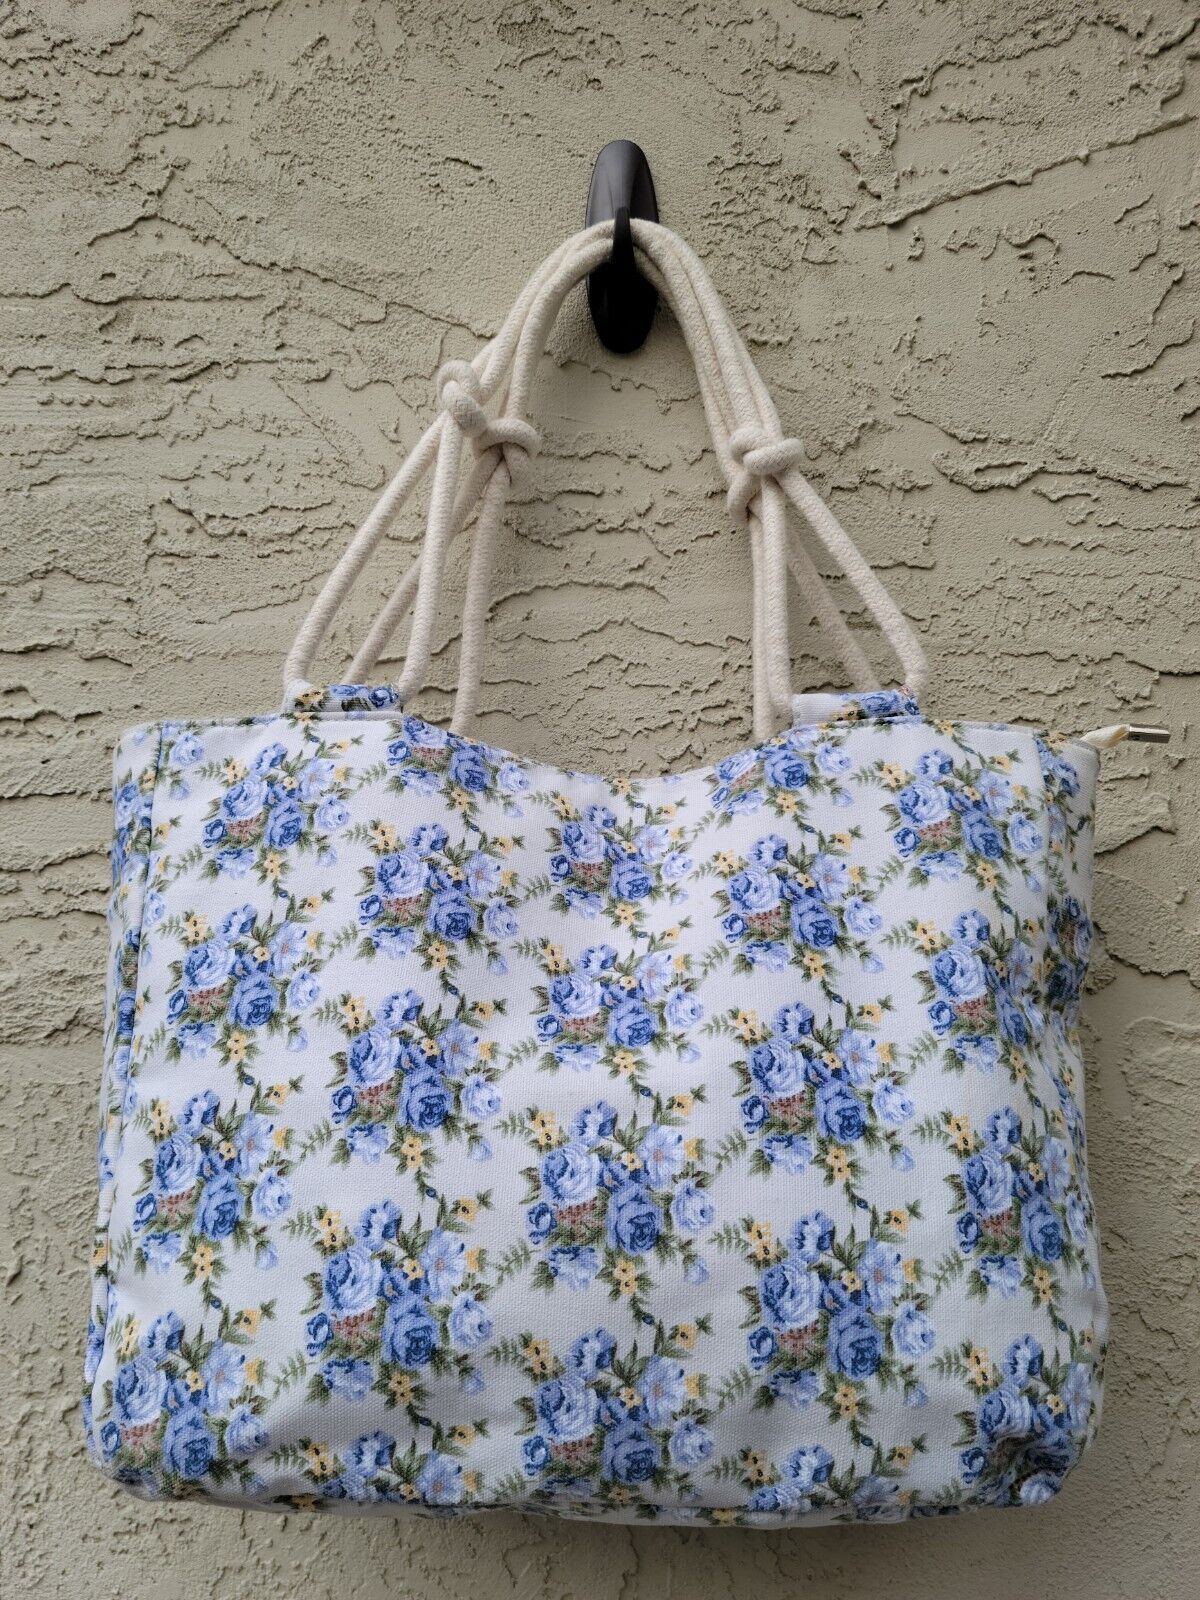 Farmhouse Is My Style Blue Rose Floral Tote - image 4